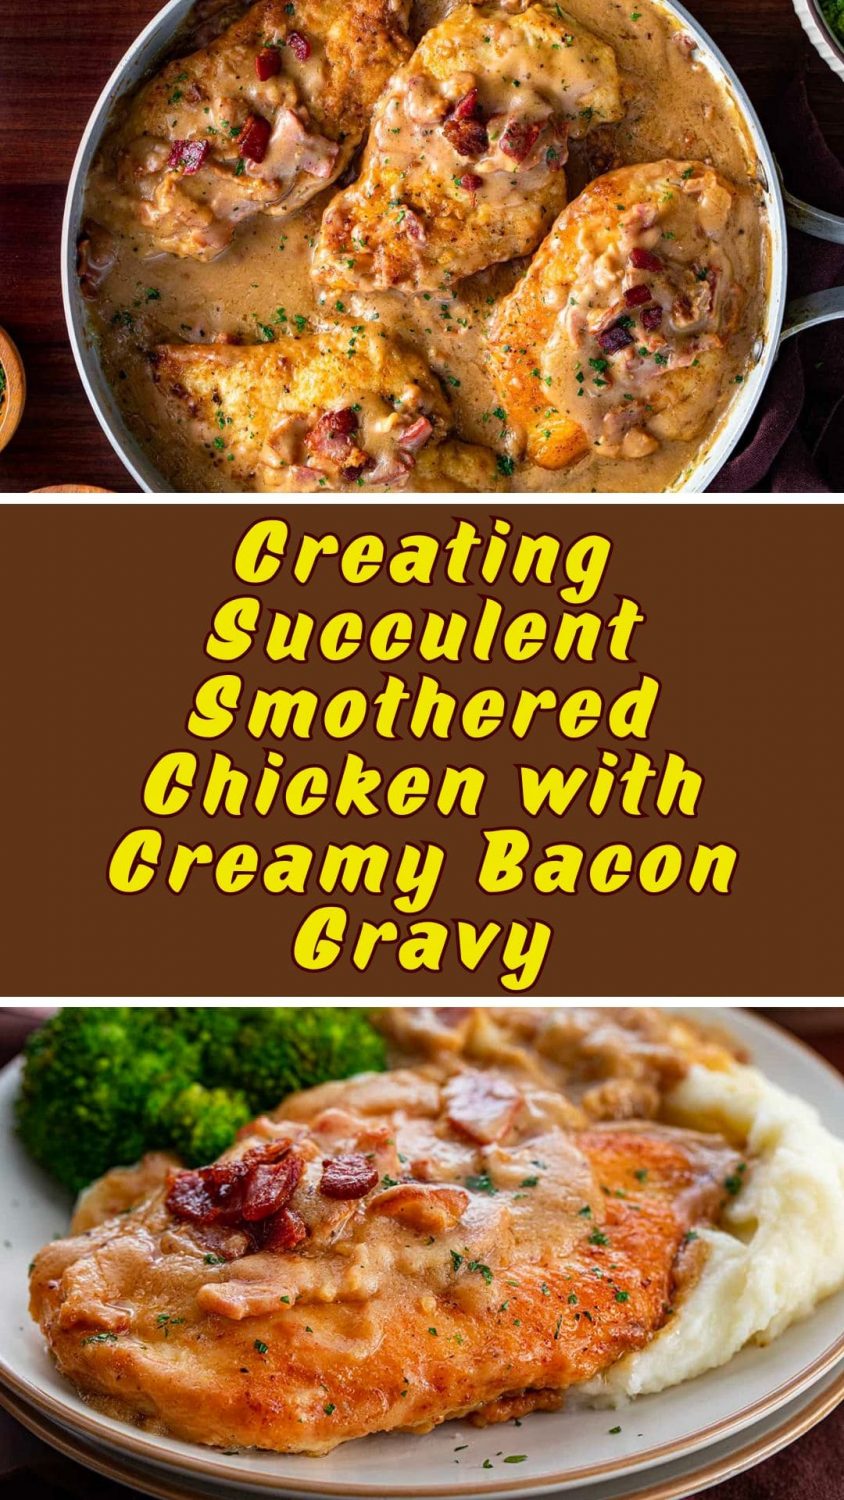 Creating Succulent Smothered Chicken with Creamy Bacon Gravy